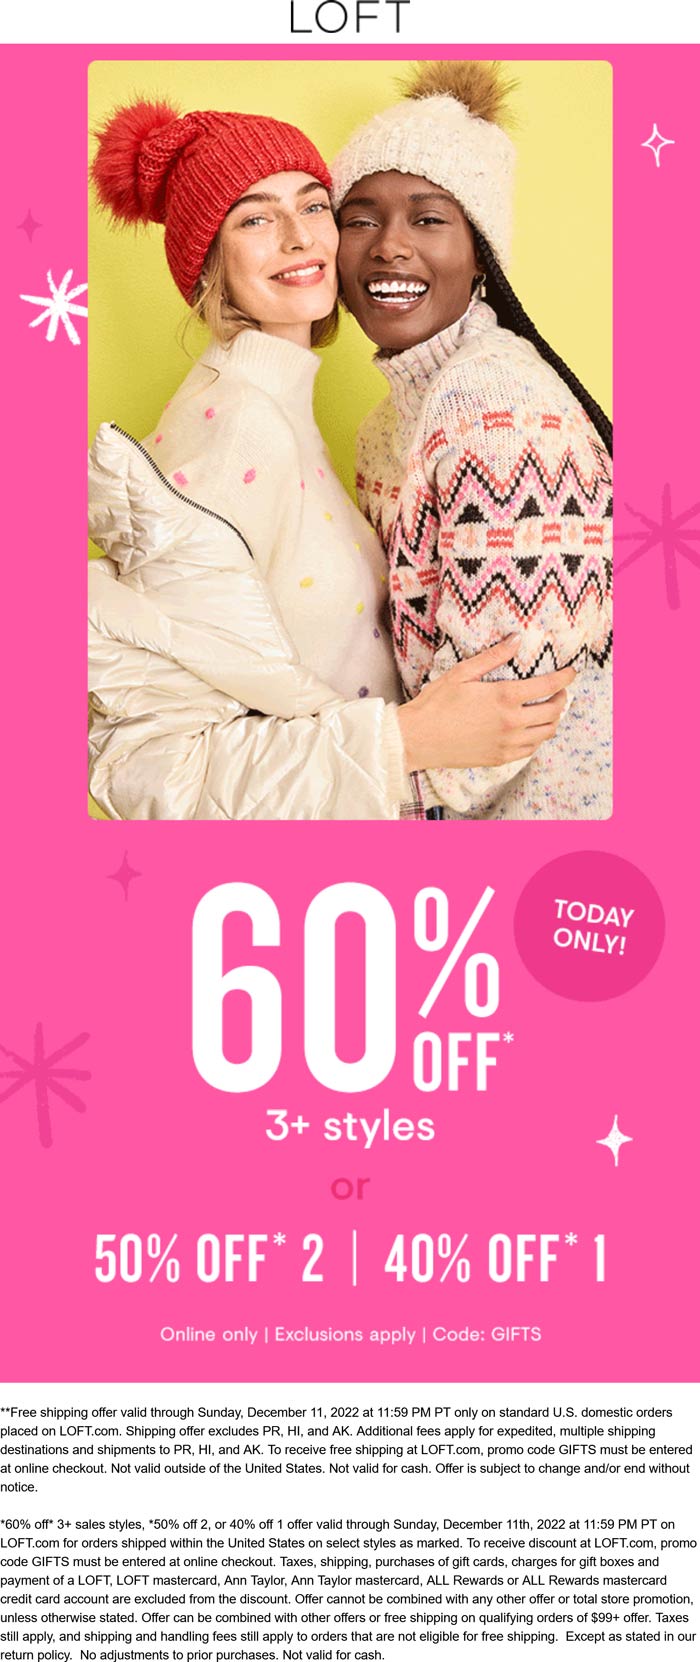 LOFT stores Coupon  60% off 3+ styles online today at LOFT via promo code GIFTS #loft 